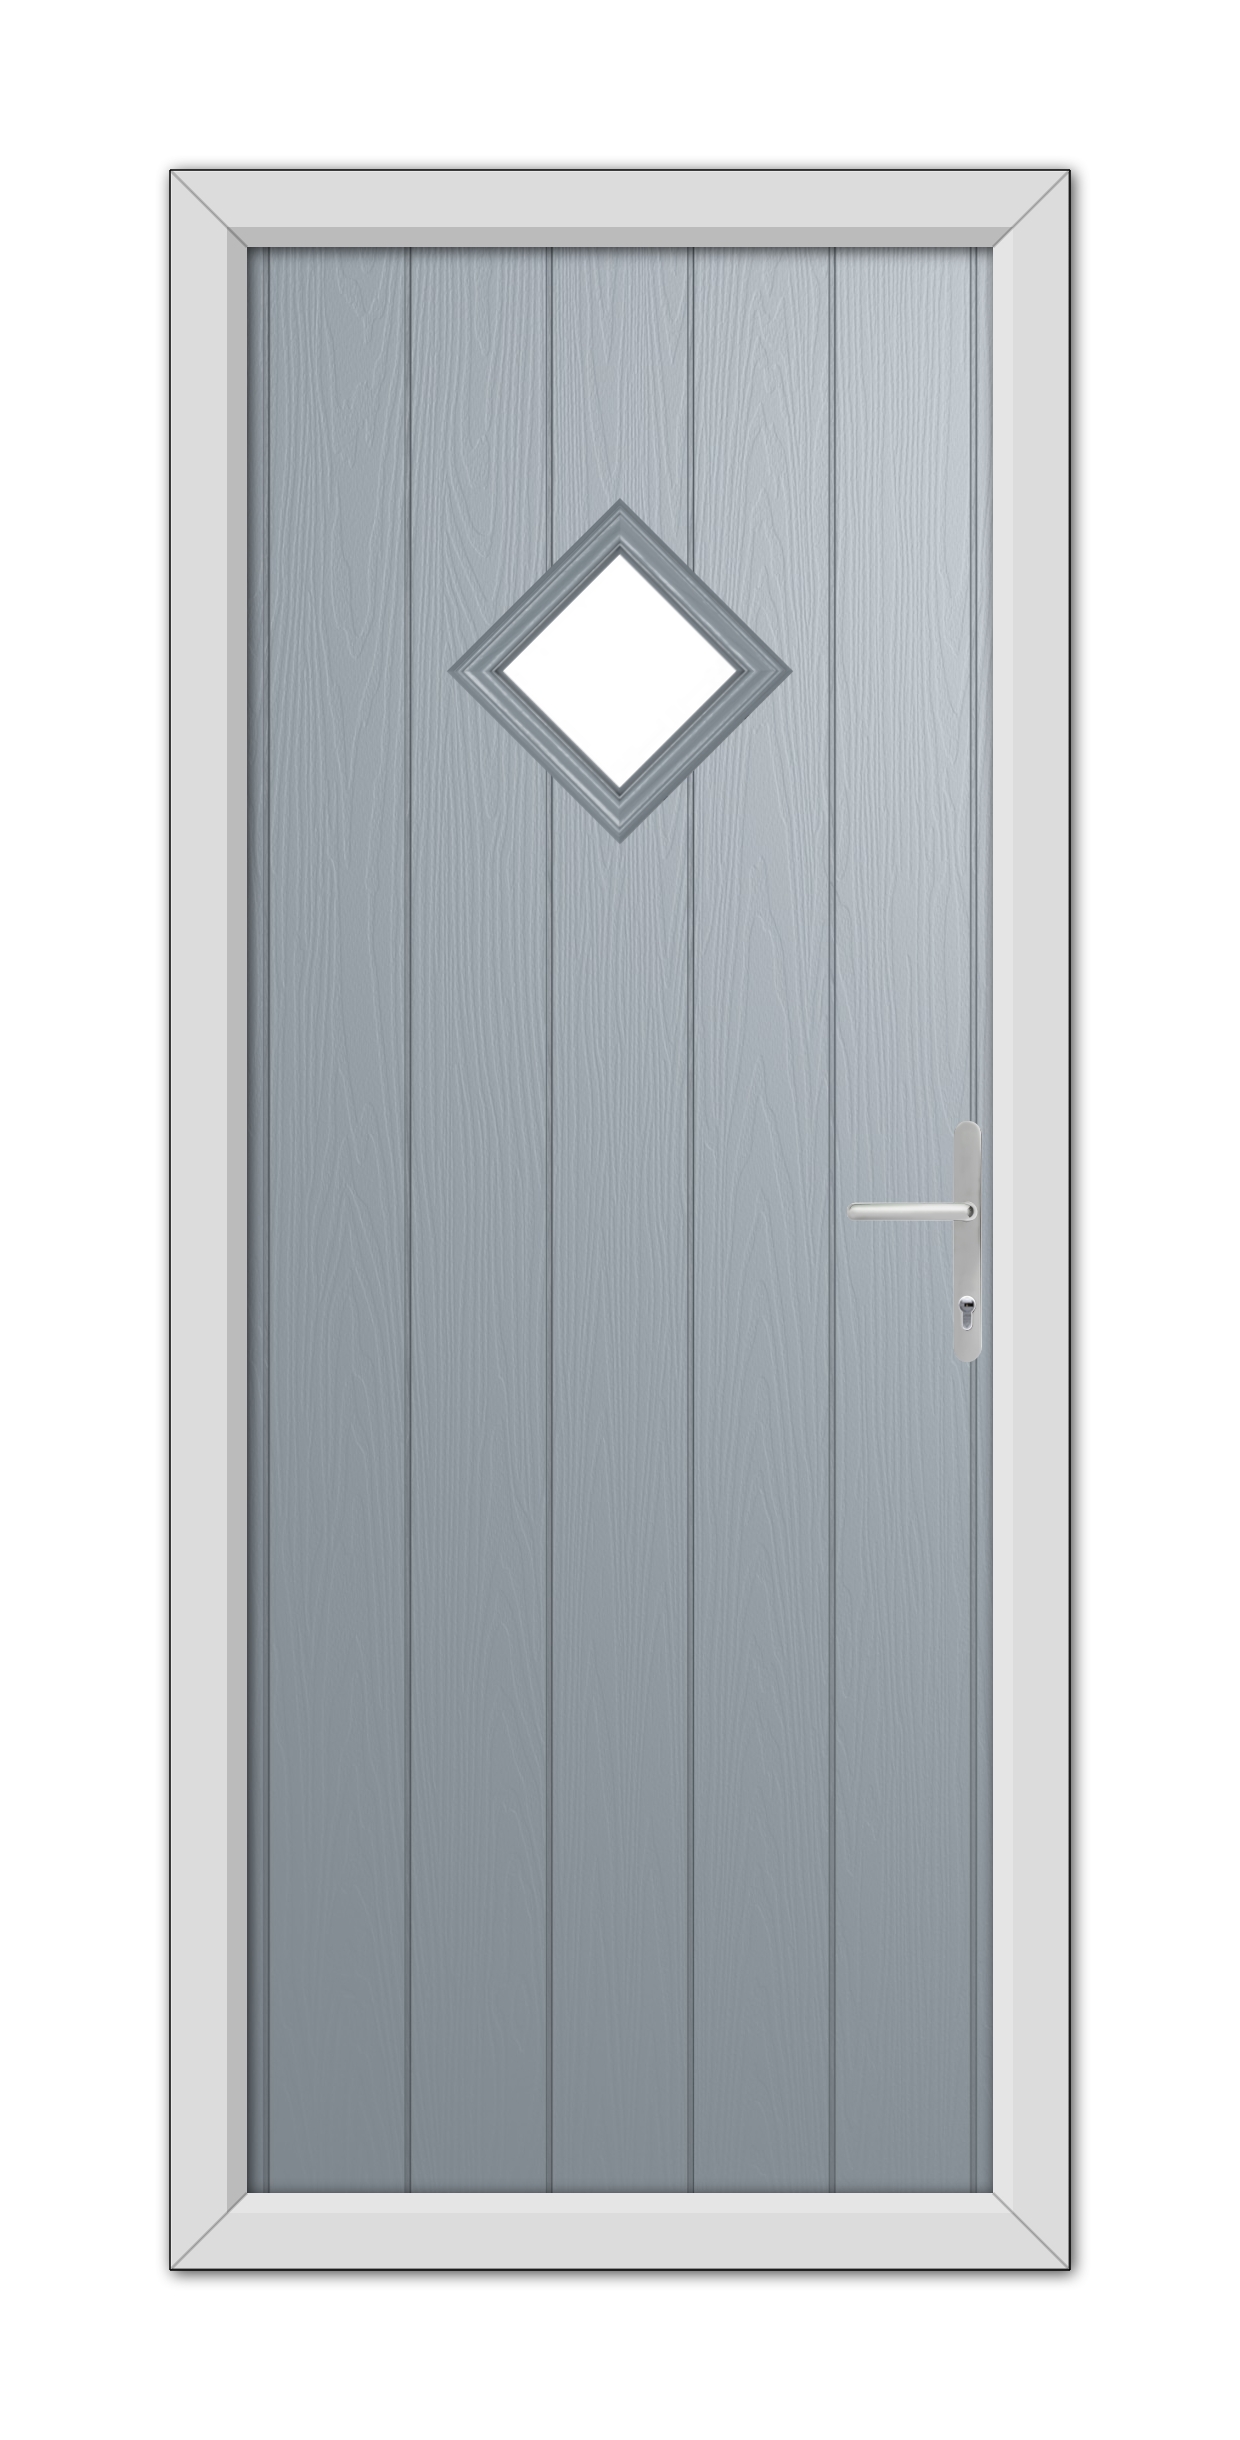 A French Grey Cornwall Composite Door 48mm Timber Core with a diamond-shaped window and a modern handle, framed in a white doorframe.